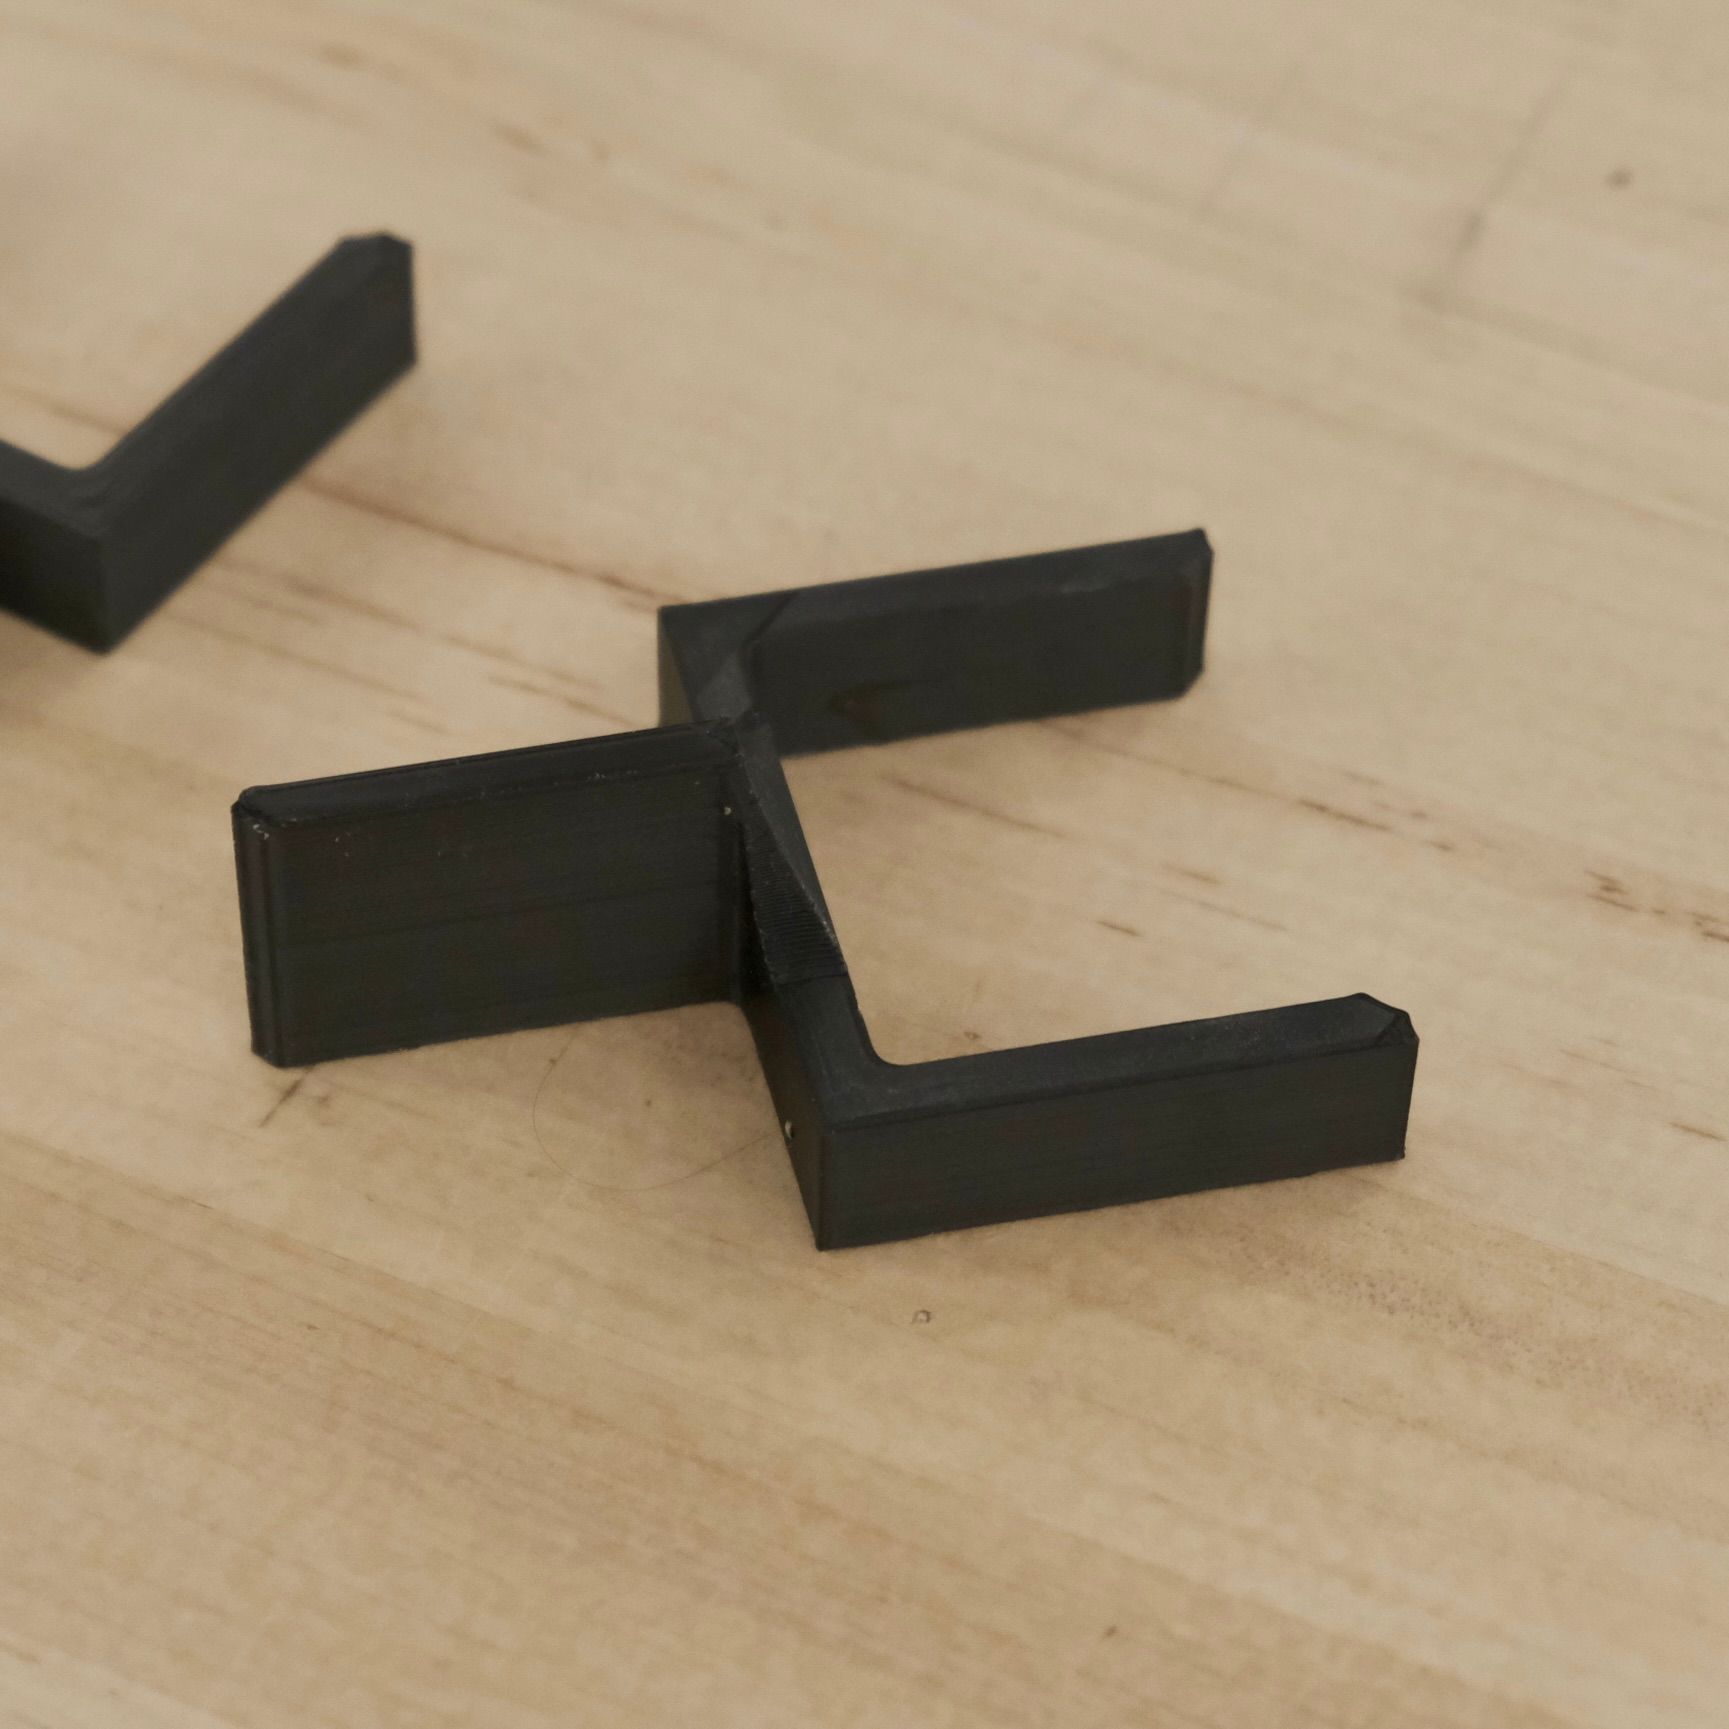 black plastic clip resembling a football goal post laying flat on a wooden table